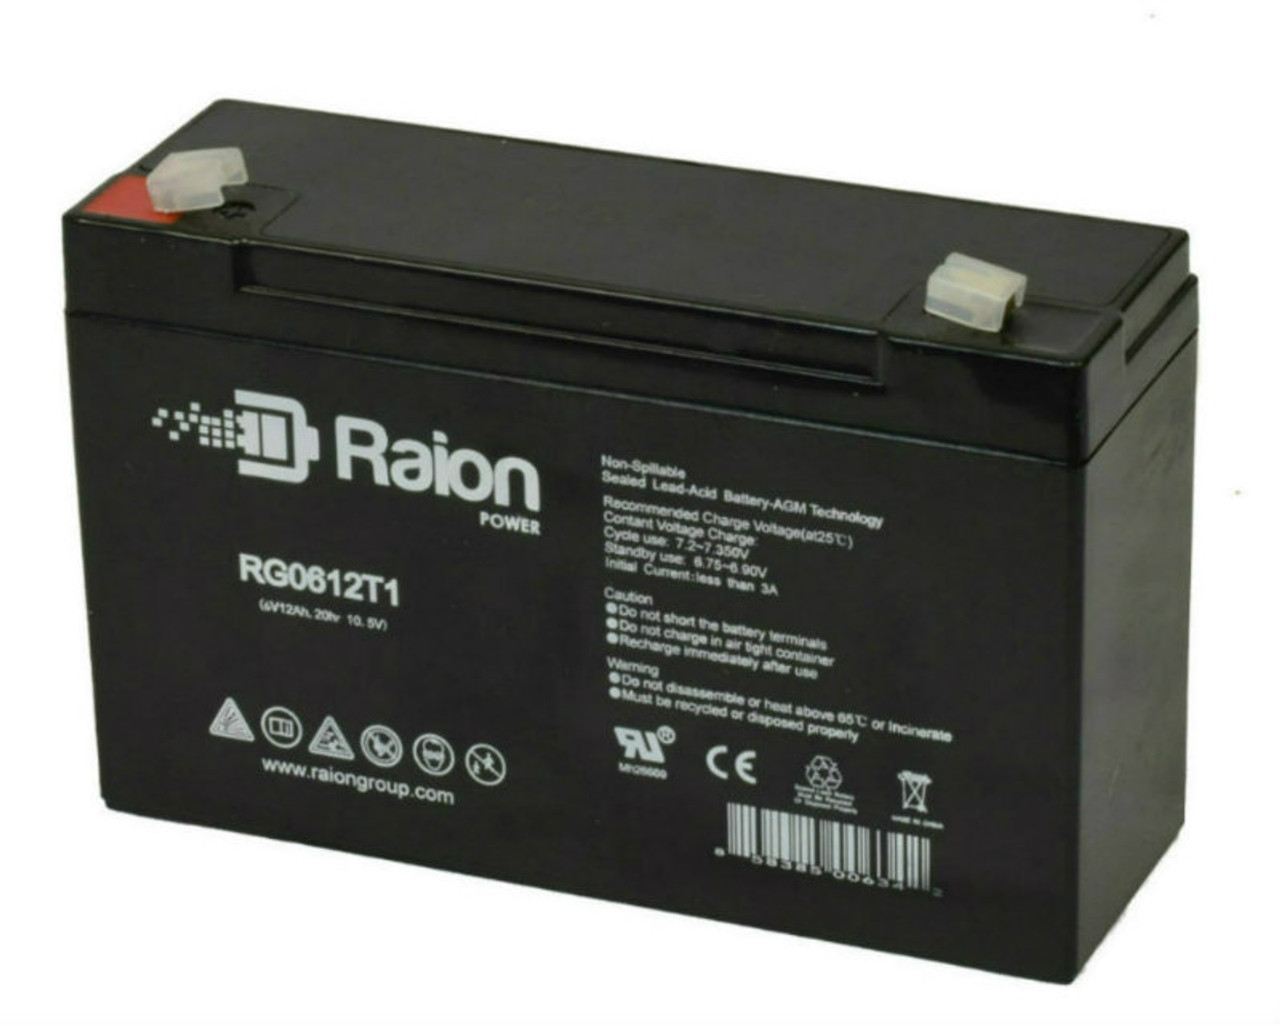 Raion Power RG06120T1 Replacement Emergency Light Battery for York-Wide Light M2E12